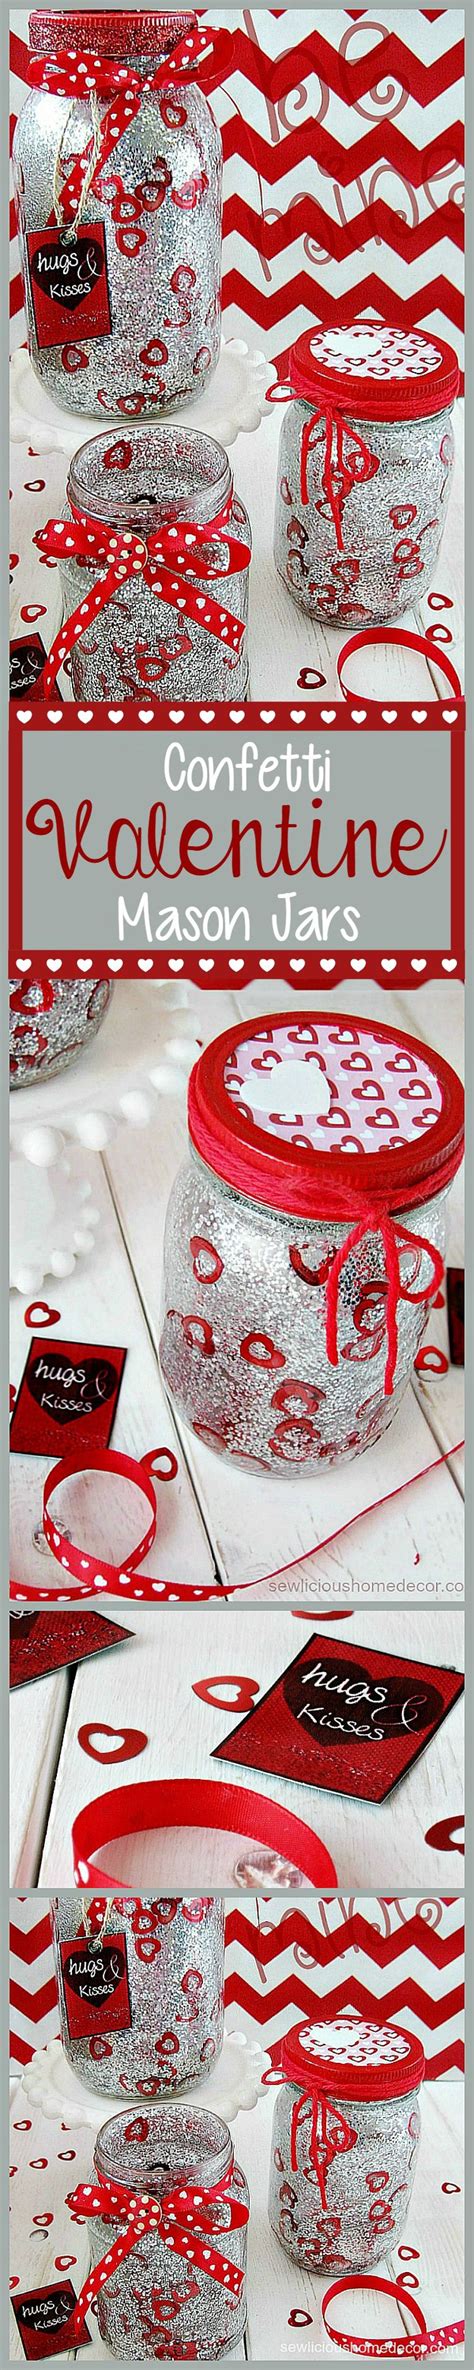 How To Make Confetti Mason Jars For Valentines Cost Less Than 5